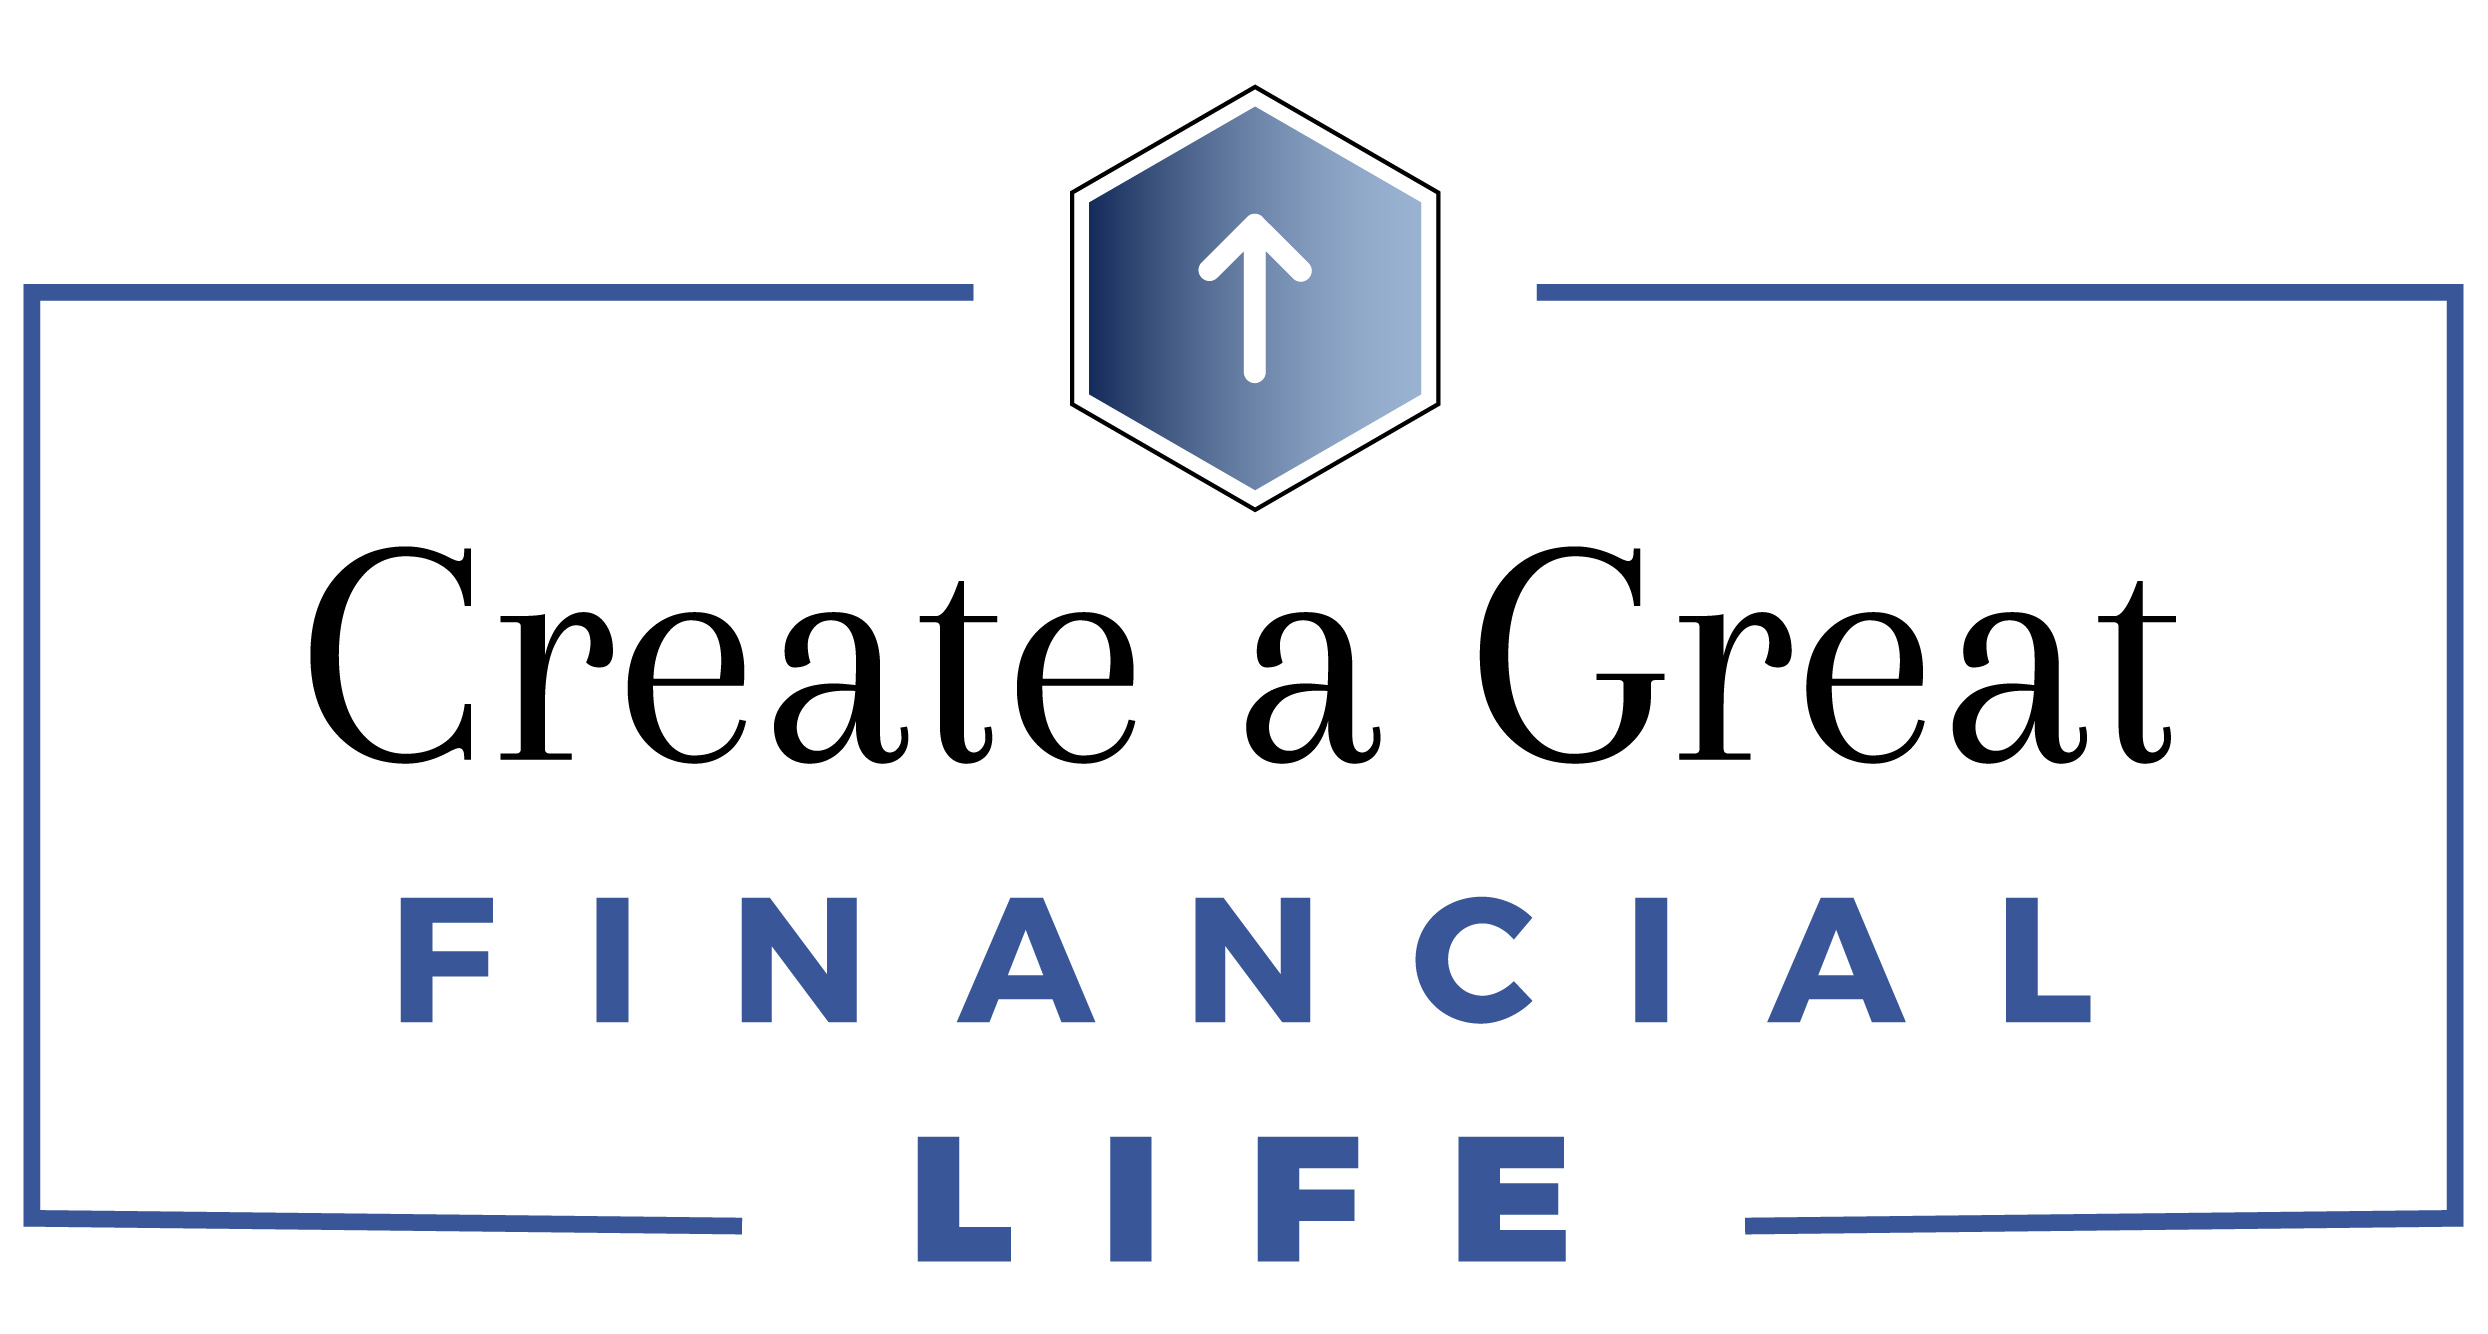 Create a Great Financial Life